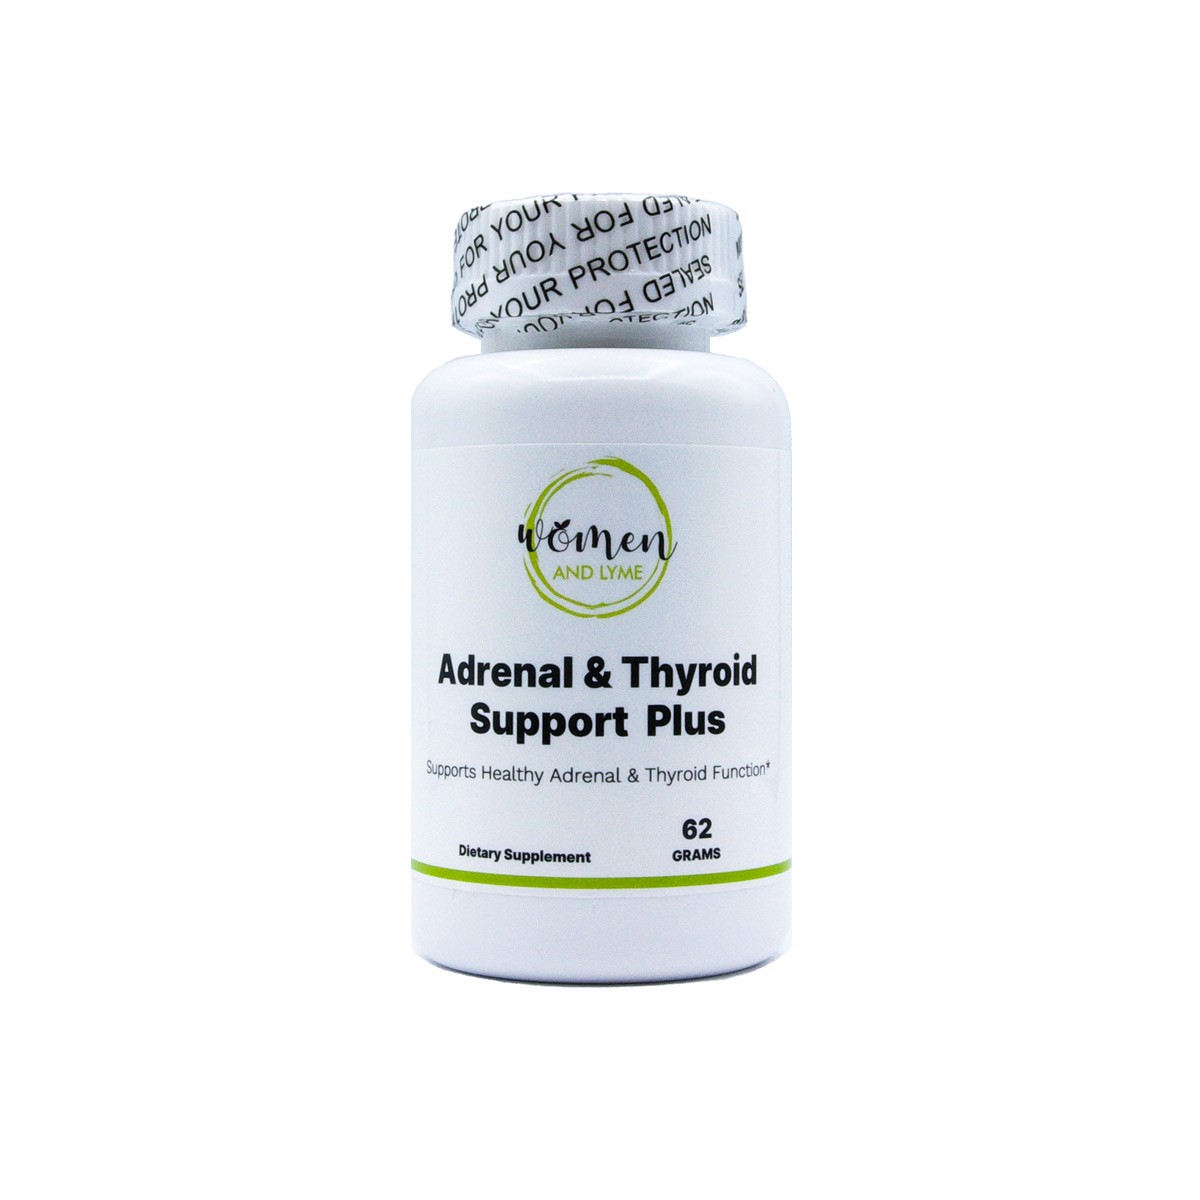 Adrenal and Thyroid Support Plus